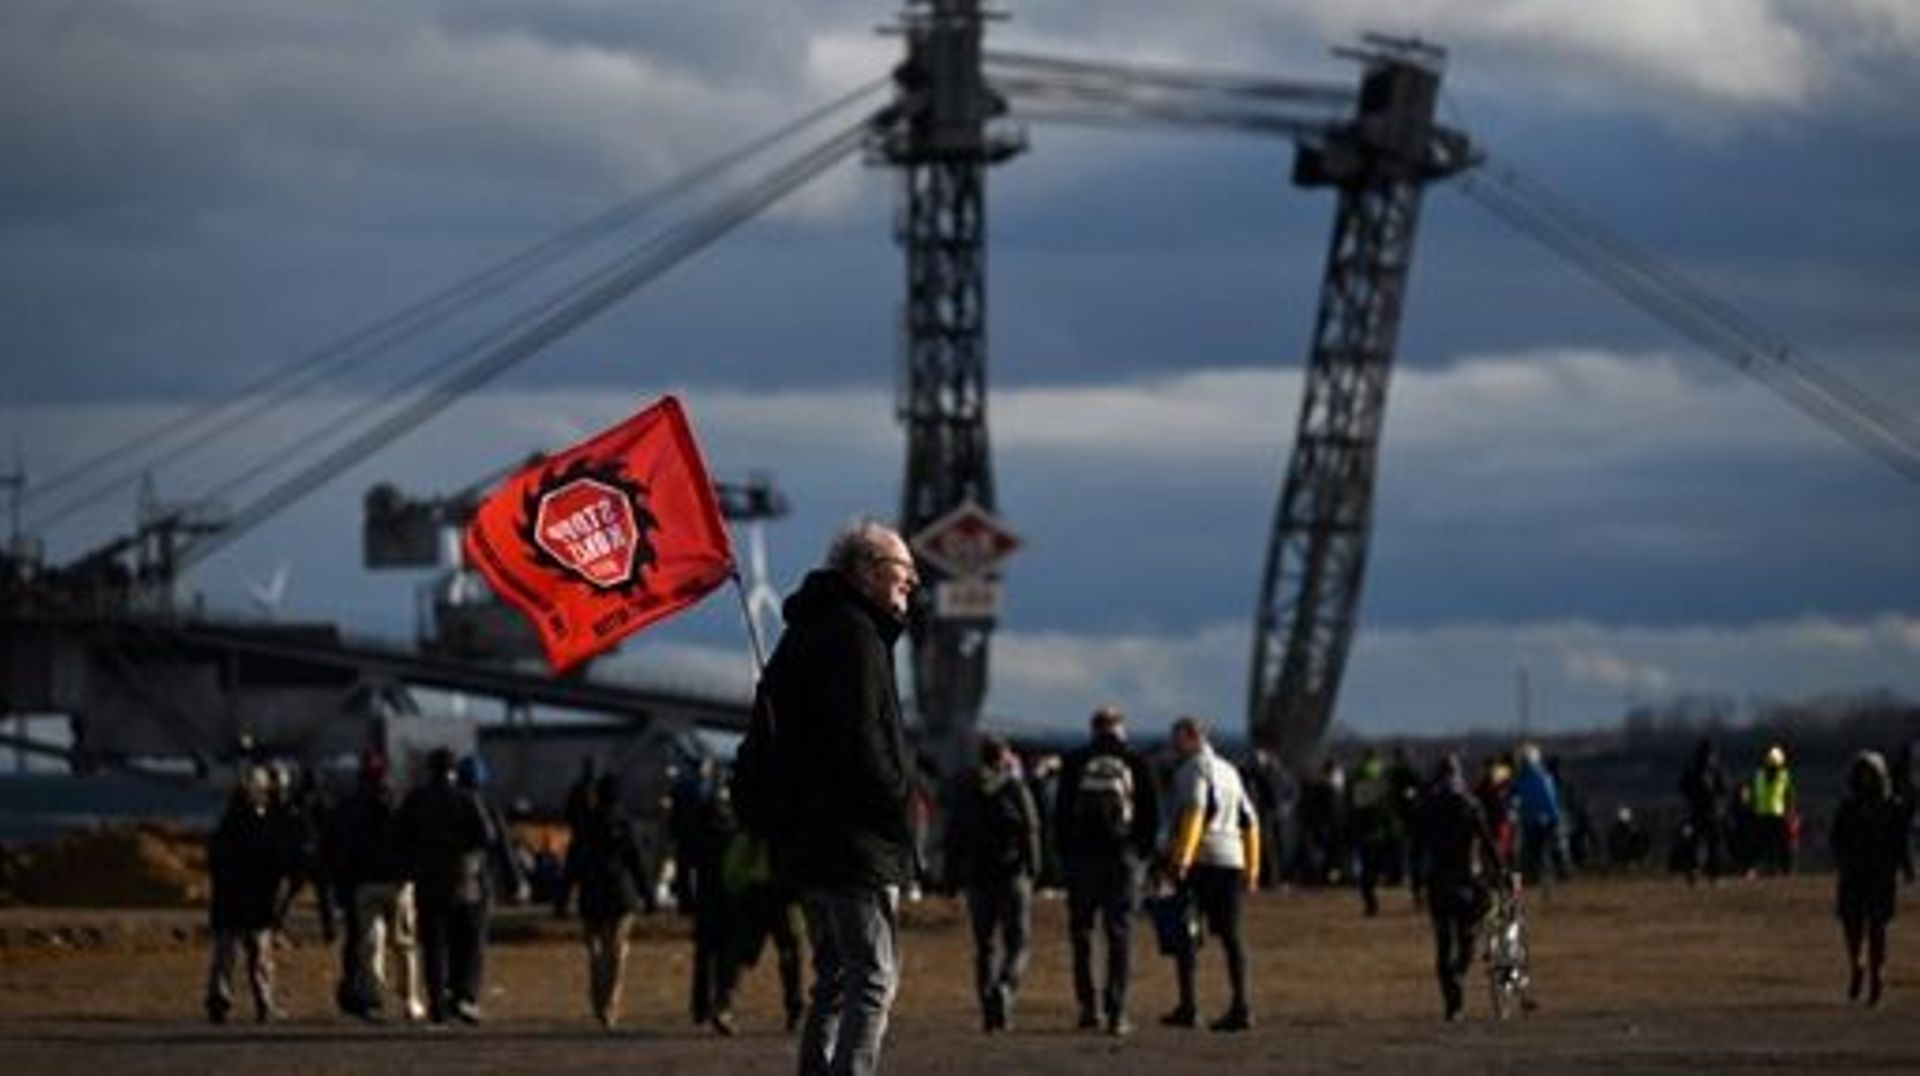 An activist stands with a flag at the Garzweiler lignite open cast mine ahead of the imminent clearance of the nearby village of Luetzerath, western Germany on January 8, 2023. Police prepare the planned evacuation of the village occupied by activists, w